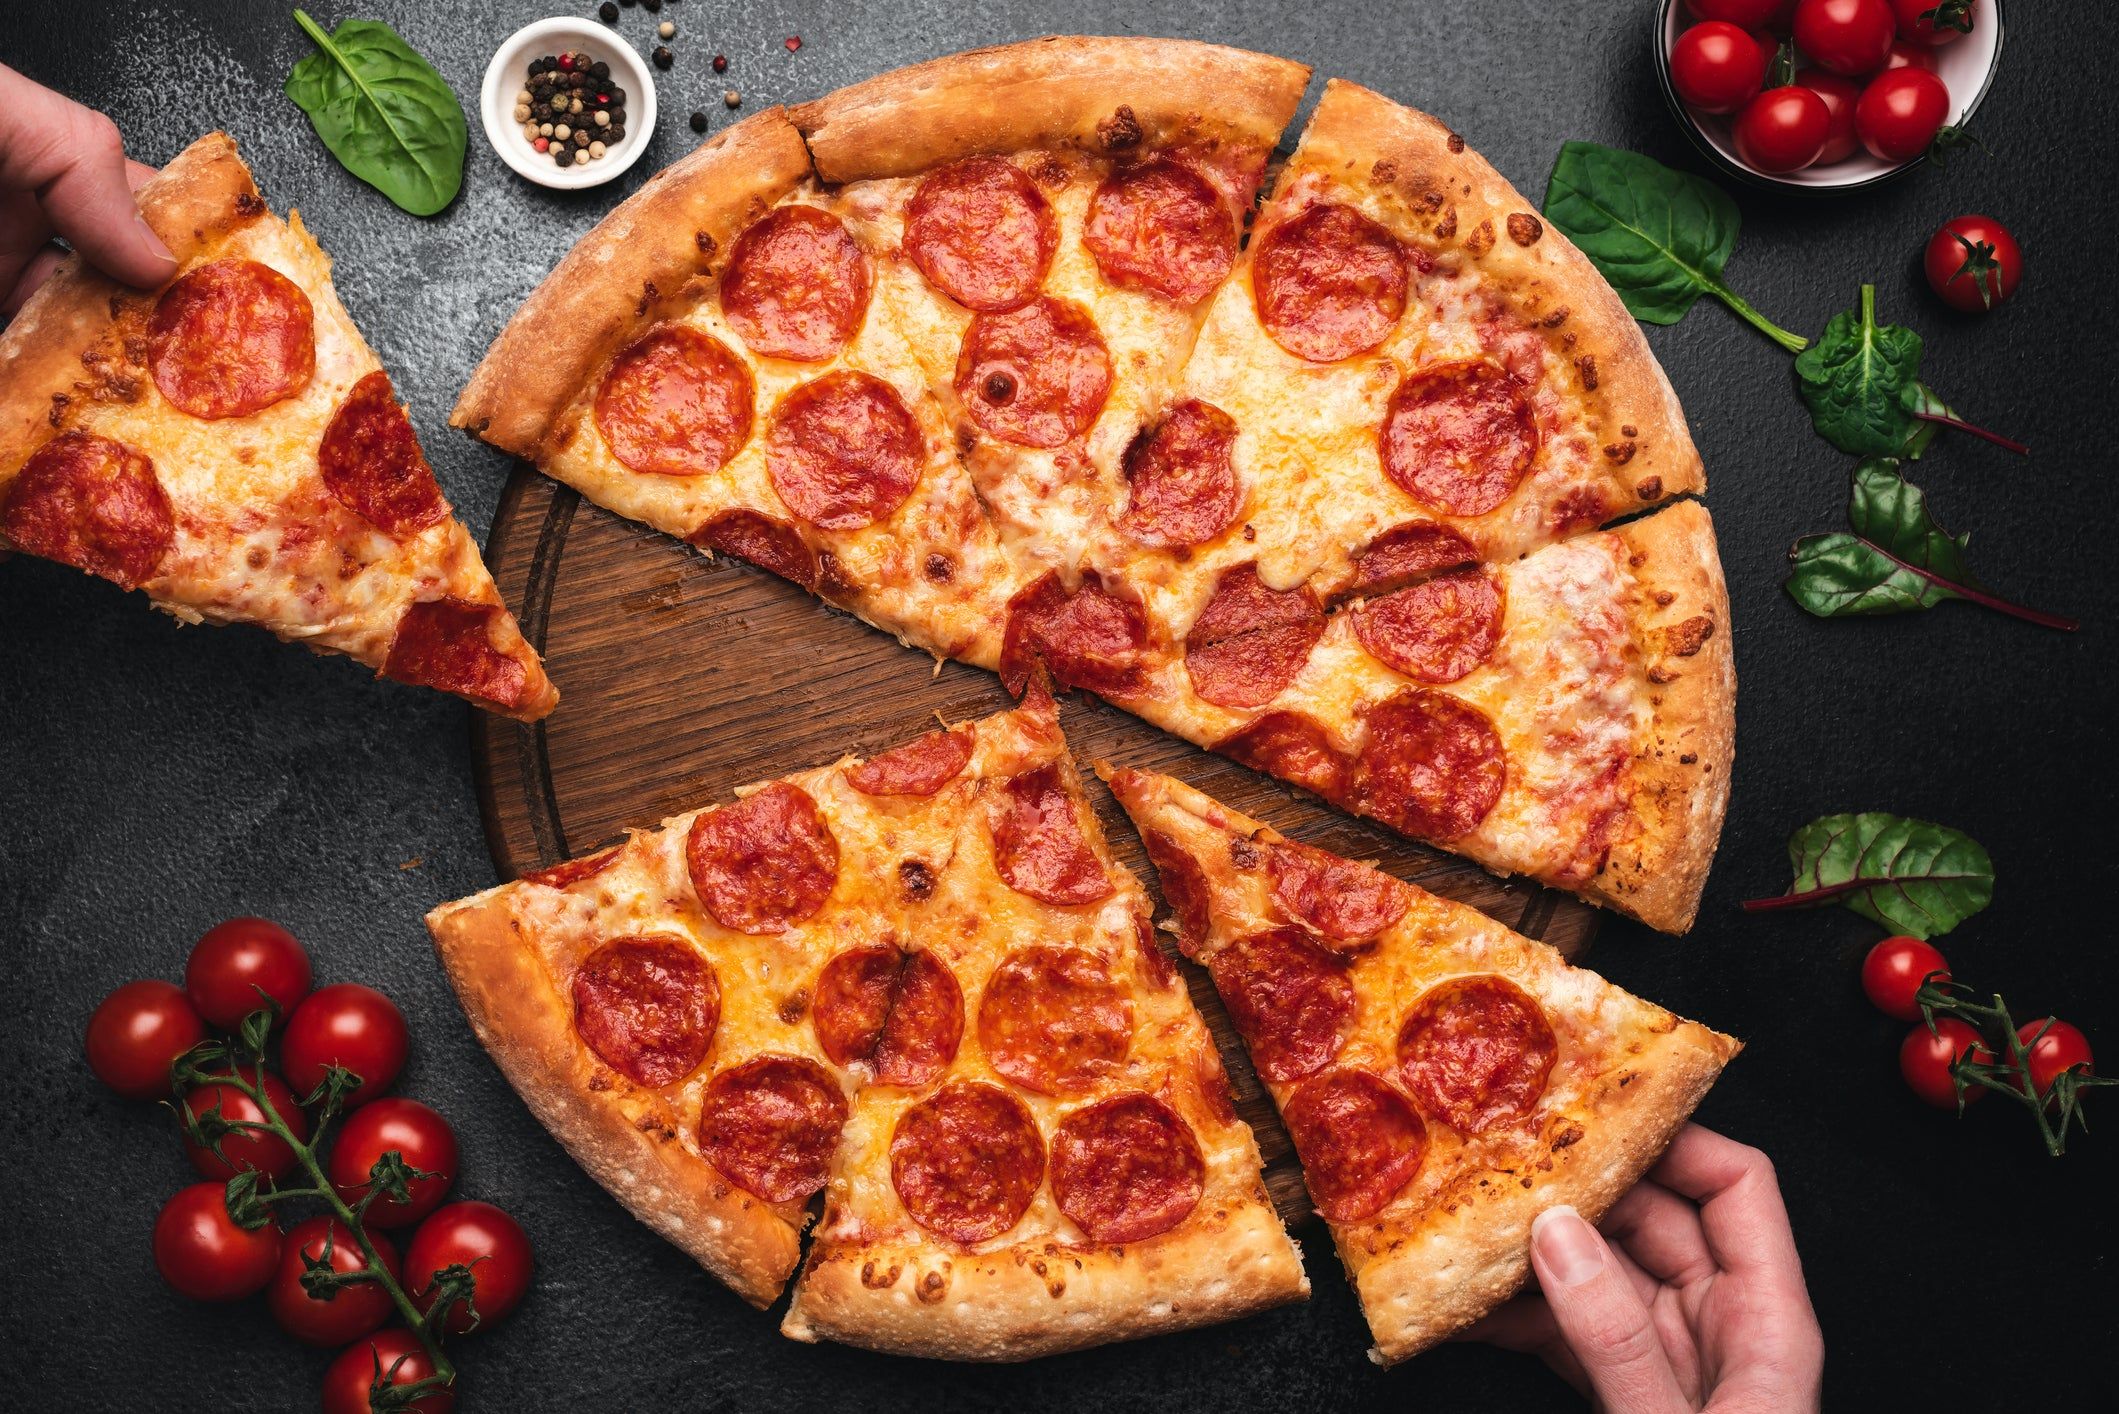 Perfect Combo Deal Available for $19.99 at Domino's Pizza with Parmesan Bread Bites, Pizza, Coca Cola & More